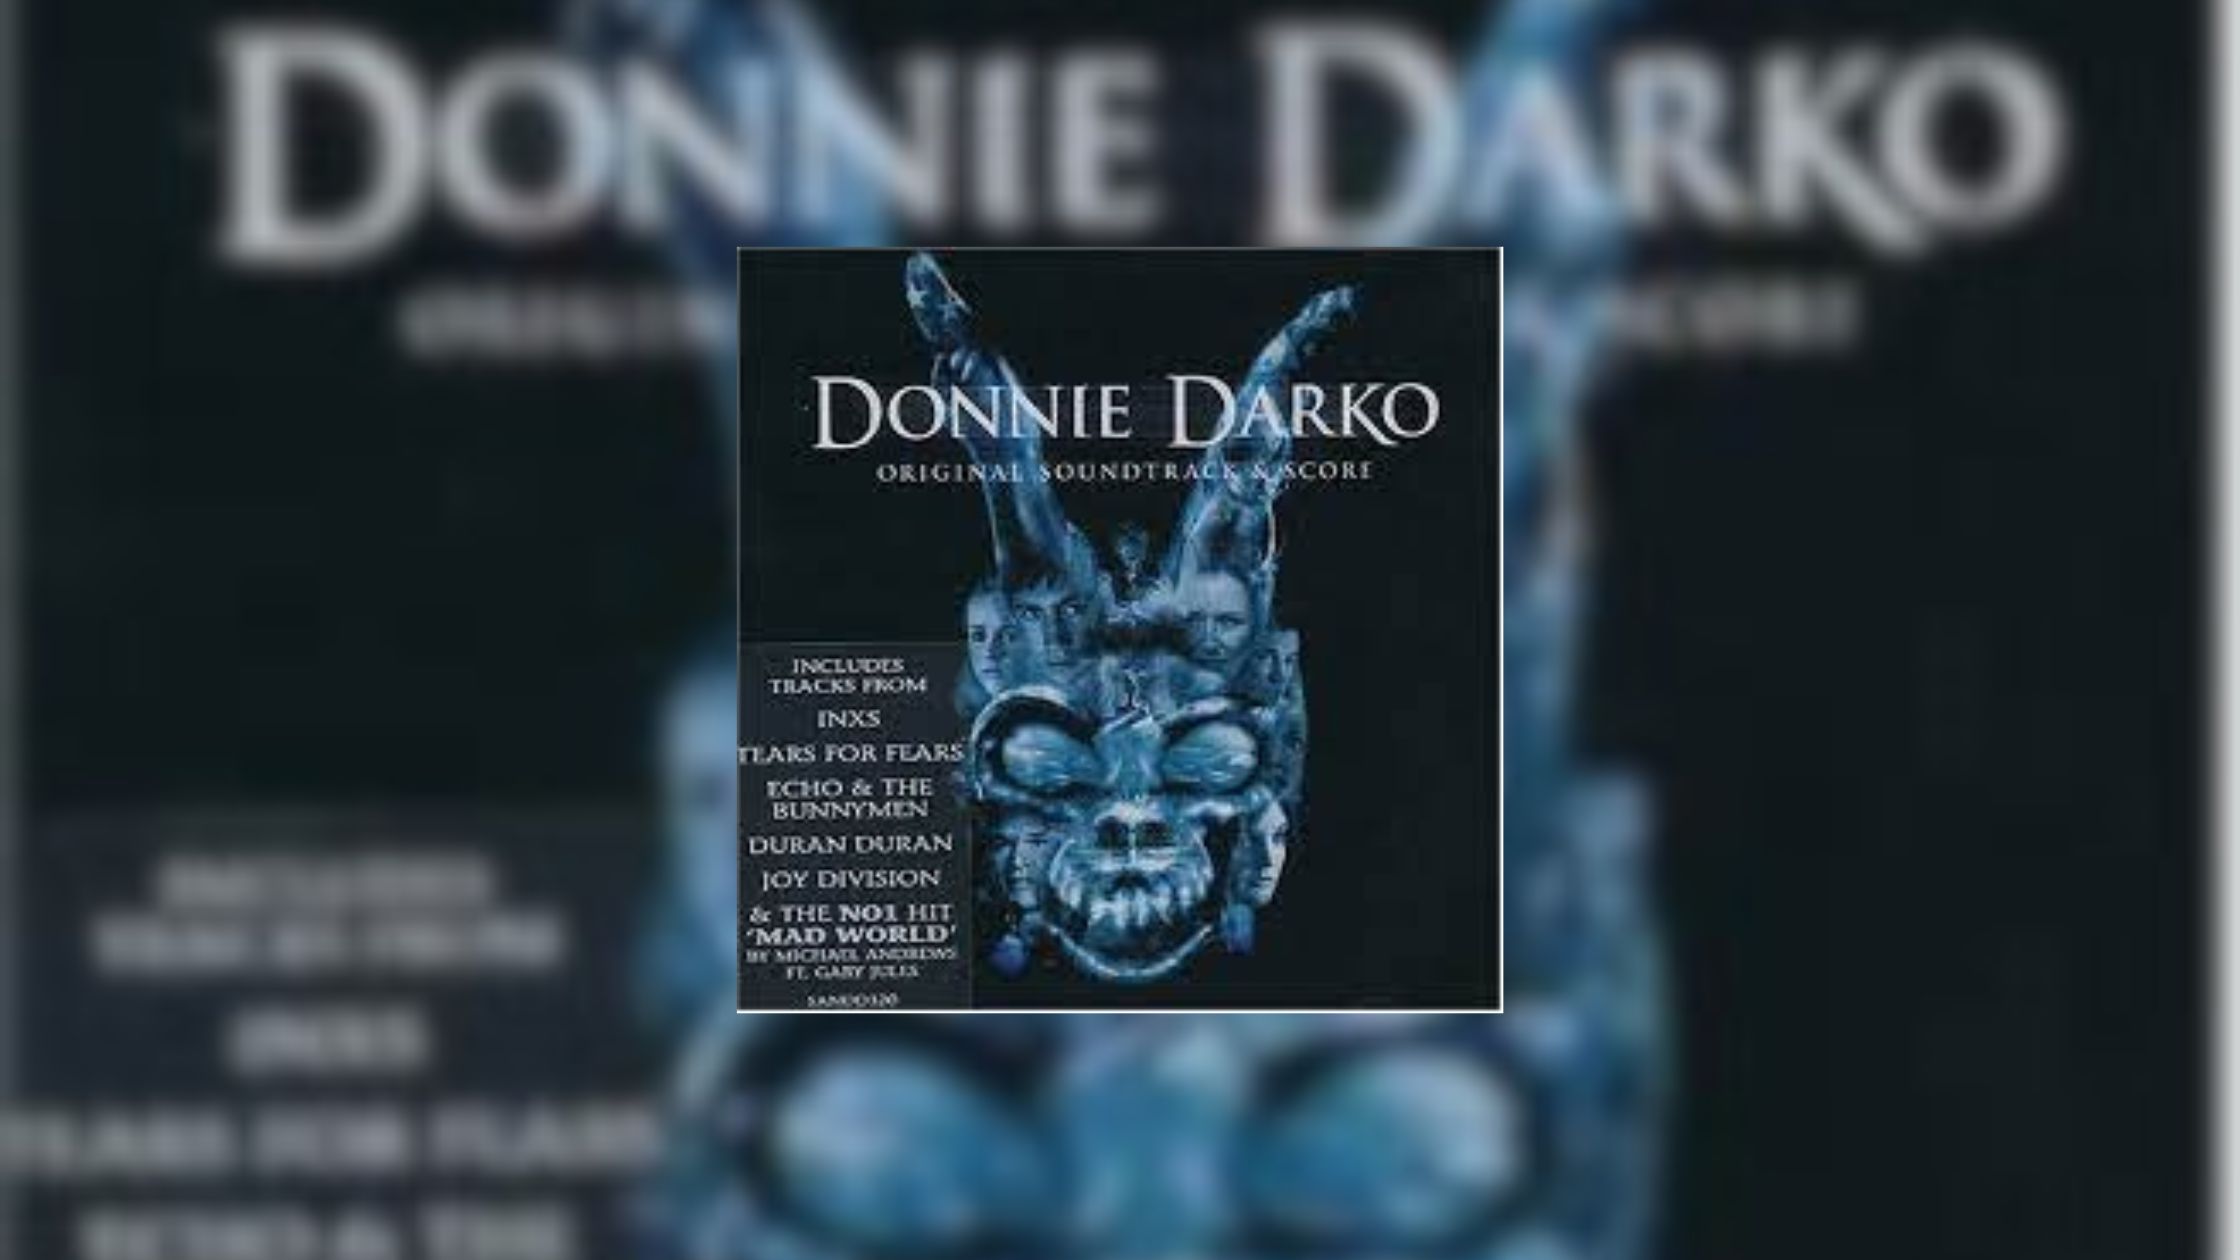 Poster Image from the film Donnie Darko released in 2001.